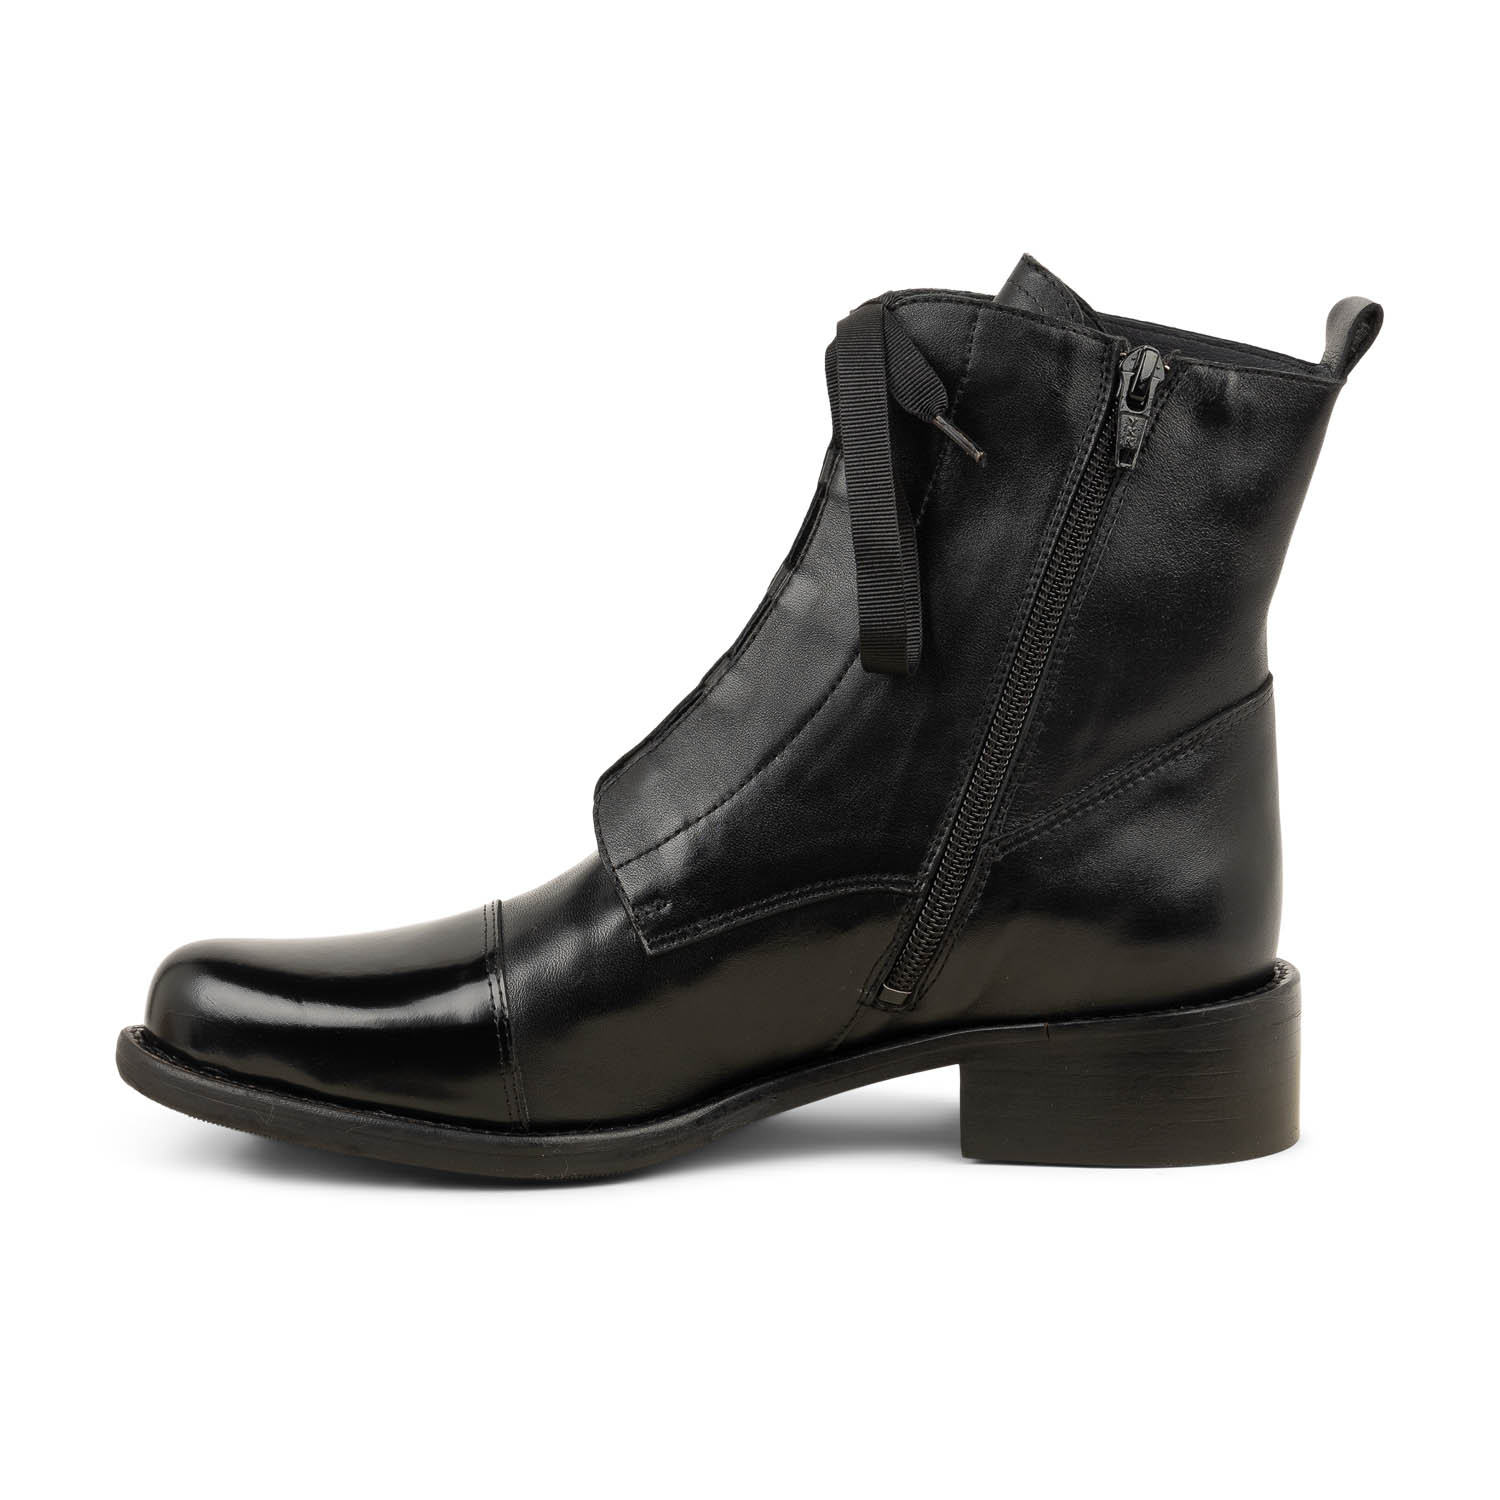 04 - MYSTYLE - MYMA - Boots et bottines - Cuir